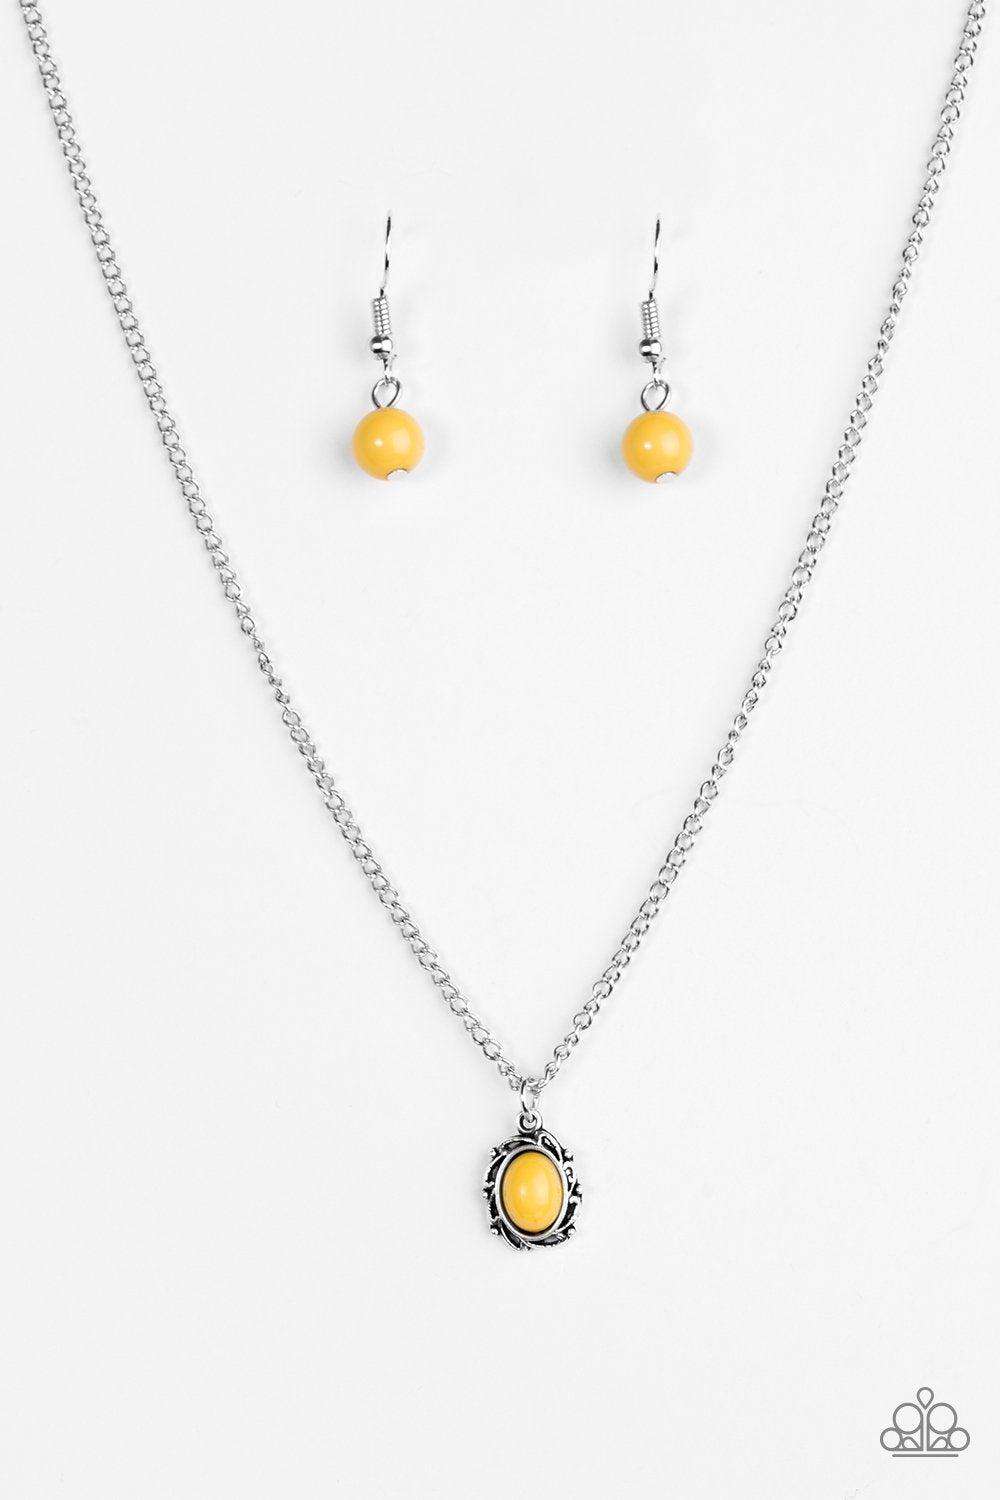 Season To Cherish Silver and Yellow Necklace - Paparazzi Accessories-CarasShop.com - $5 Jewelry by Cara Jewels